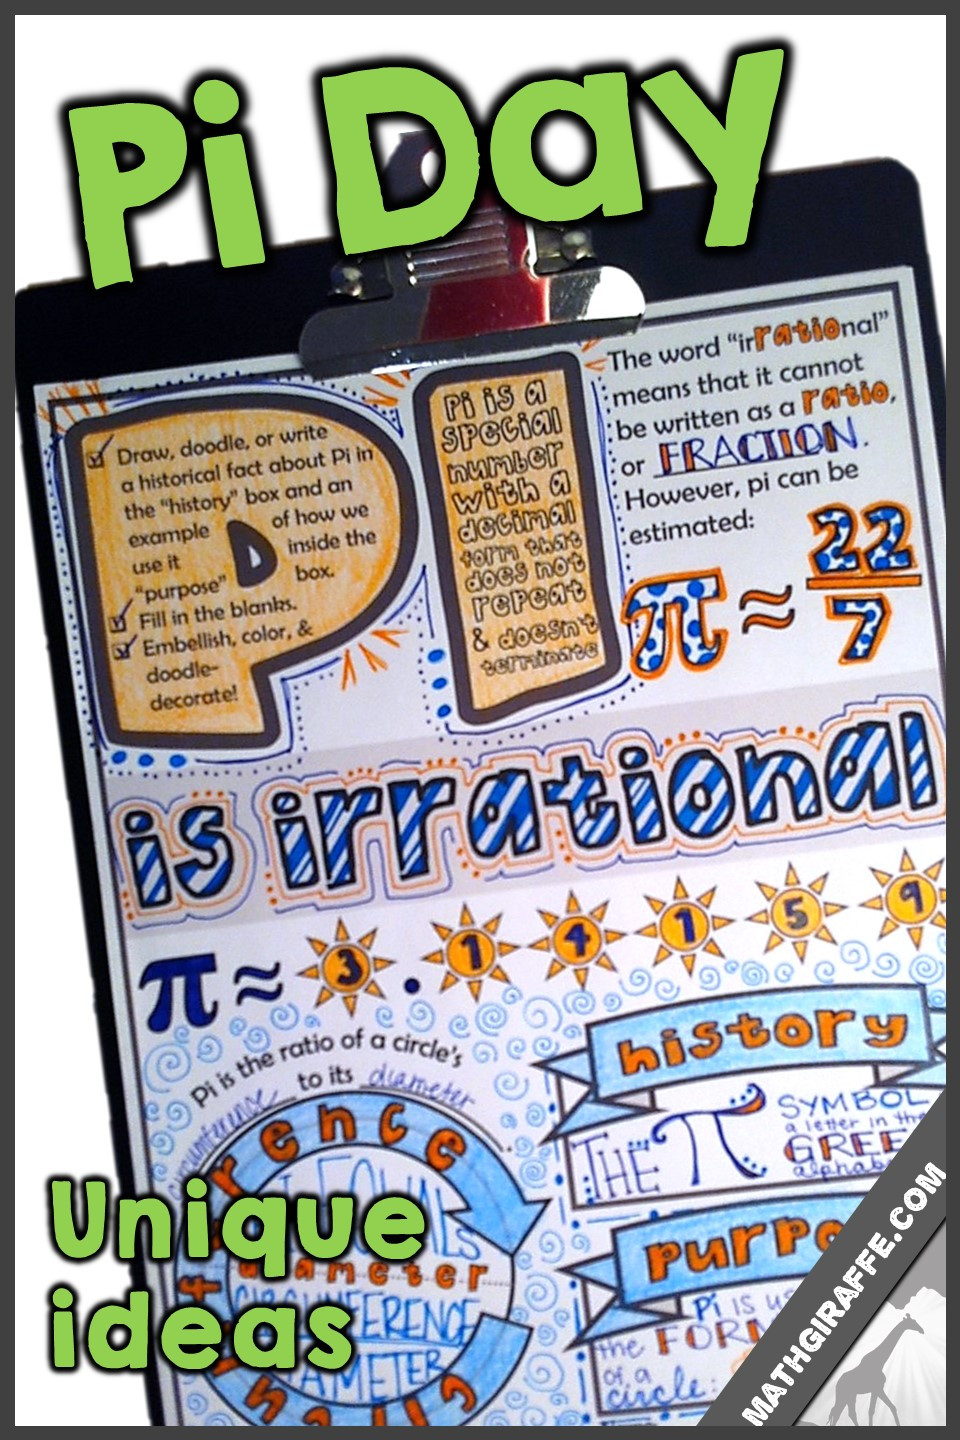 Creative Pi Day Poster Ideas
 Math Madness Basketball Math Lessons for March